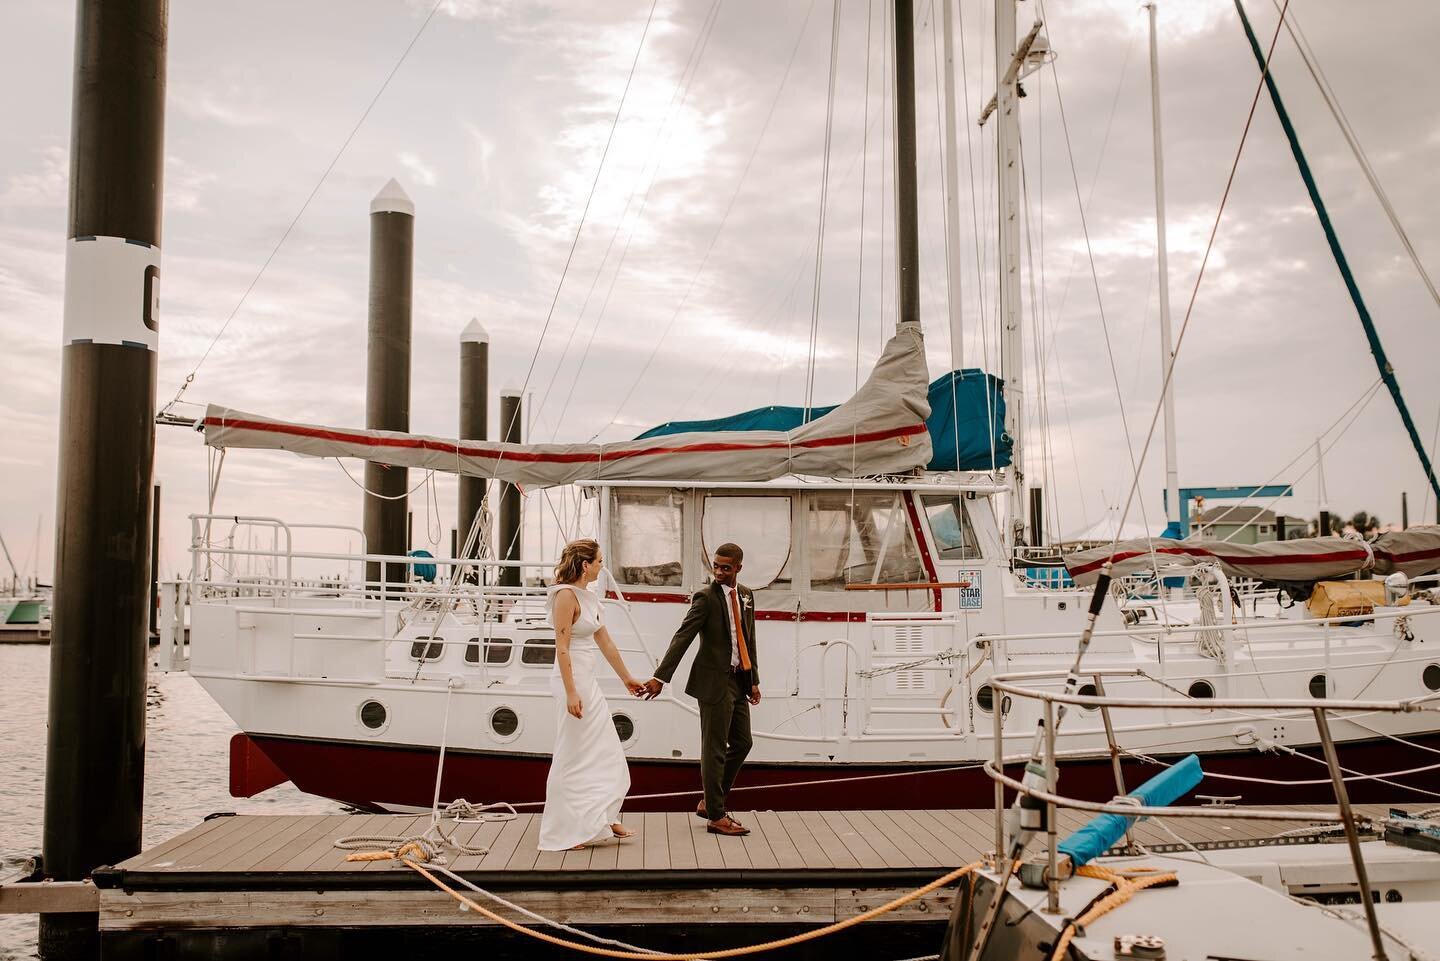 You, me, and the sea ⛵️🌊 
Carli + Darrian&rsquo;s entire wedding day consisted of intentional planning, God&rsquo;s unfailing love, and more importantly the beauty of His creation on this glorious day.